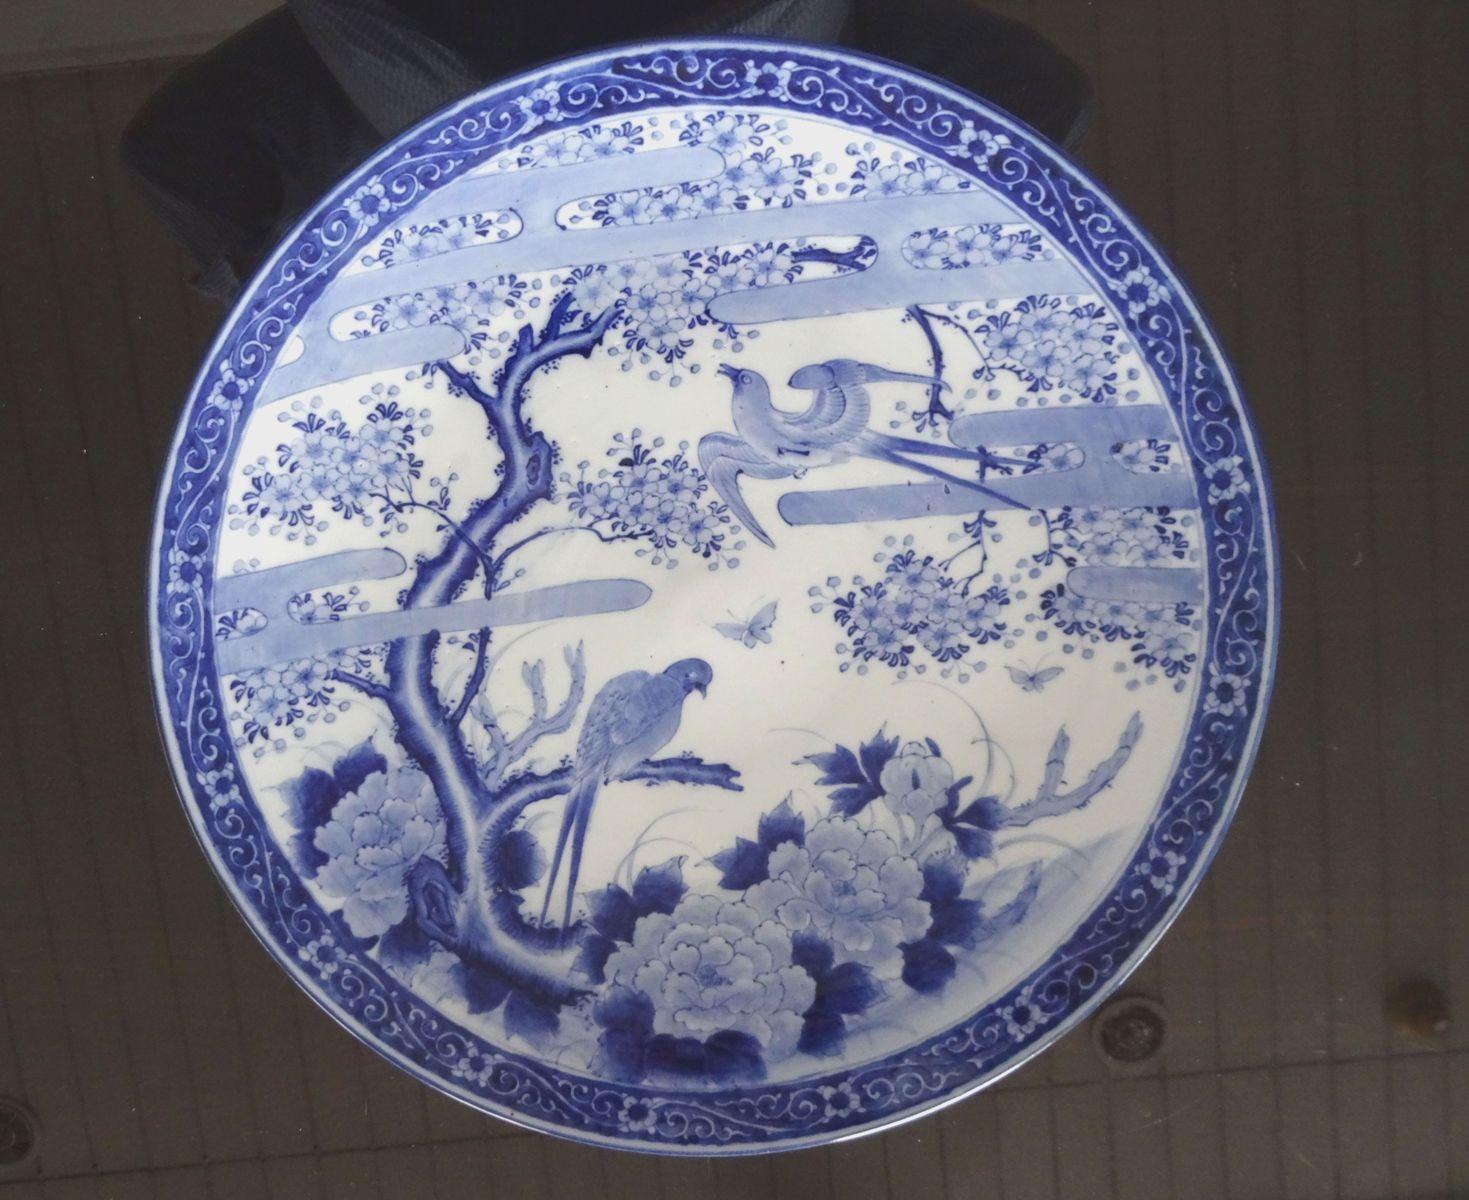 Large Antique Japanese Blue & White Porcelain Plate, 19th century - Art by Unknown